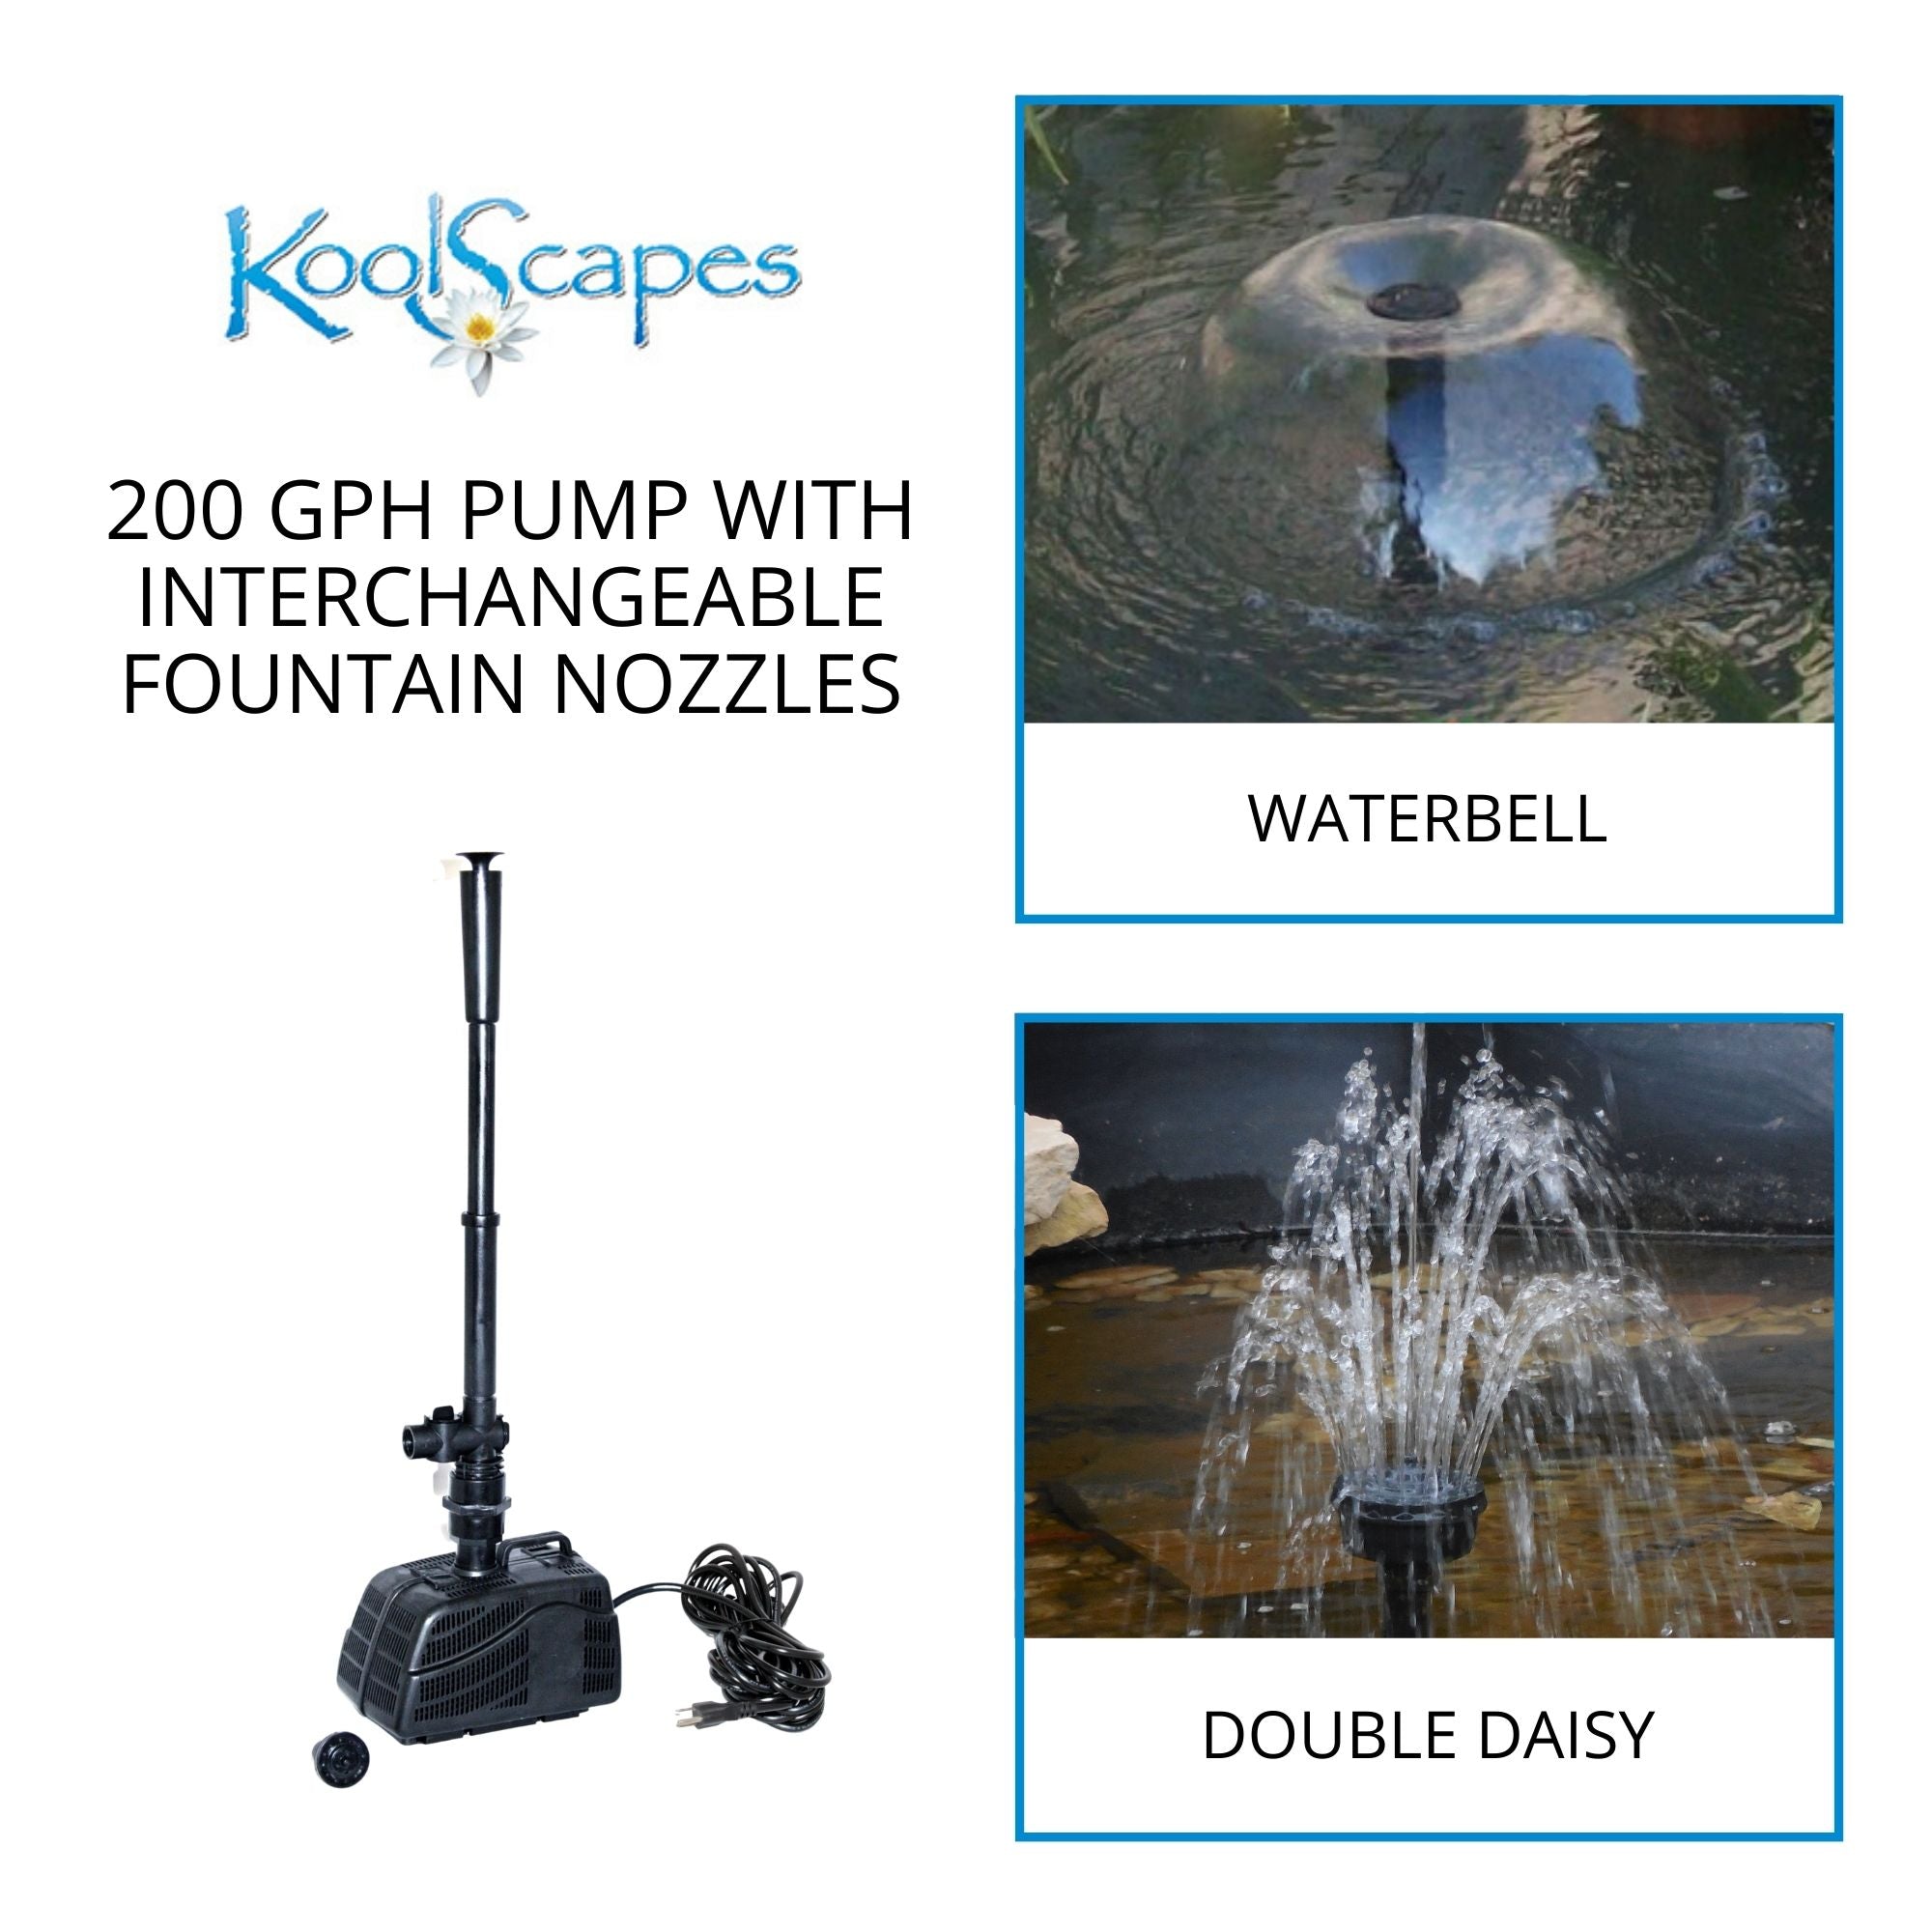 On the left is a product shot of the assembled pond pump on a white background with text above reading, "Koolscapes 200 GPH pump with interchangeable fountain nozzles.” On the right are two closeup images of the two types of fountain sprays, labeled waterbell and double daisy 